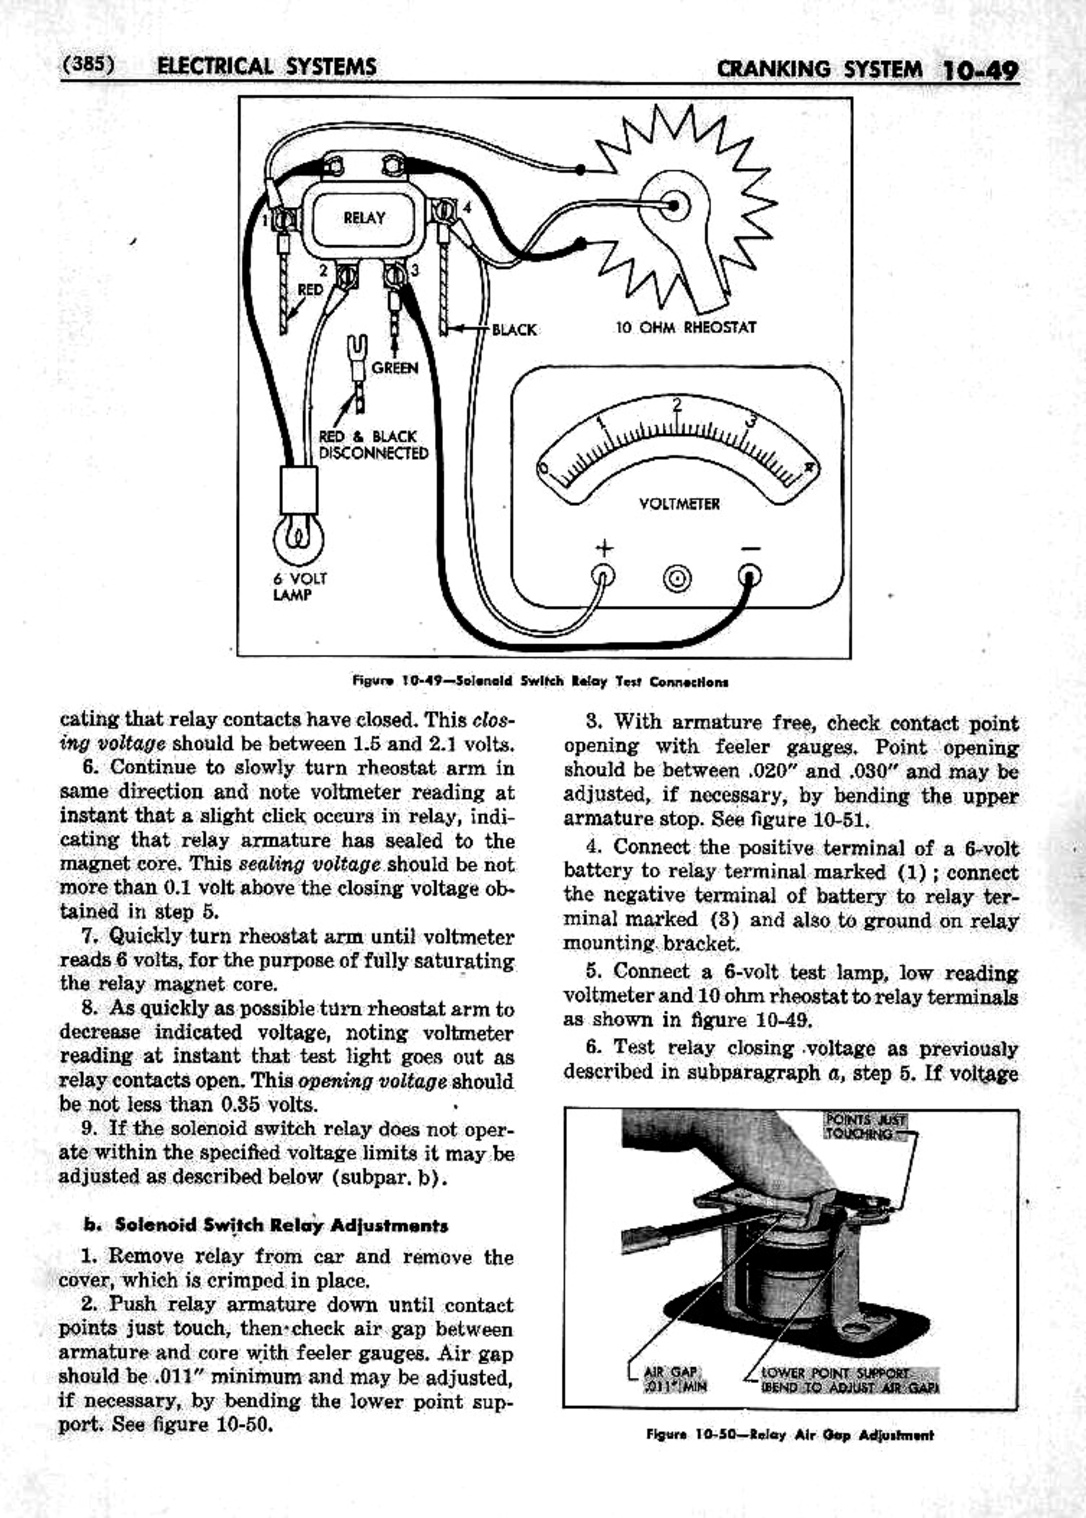 n_11 1952 Buick Shop Manual - Electrical Systems-049-049.jpg